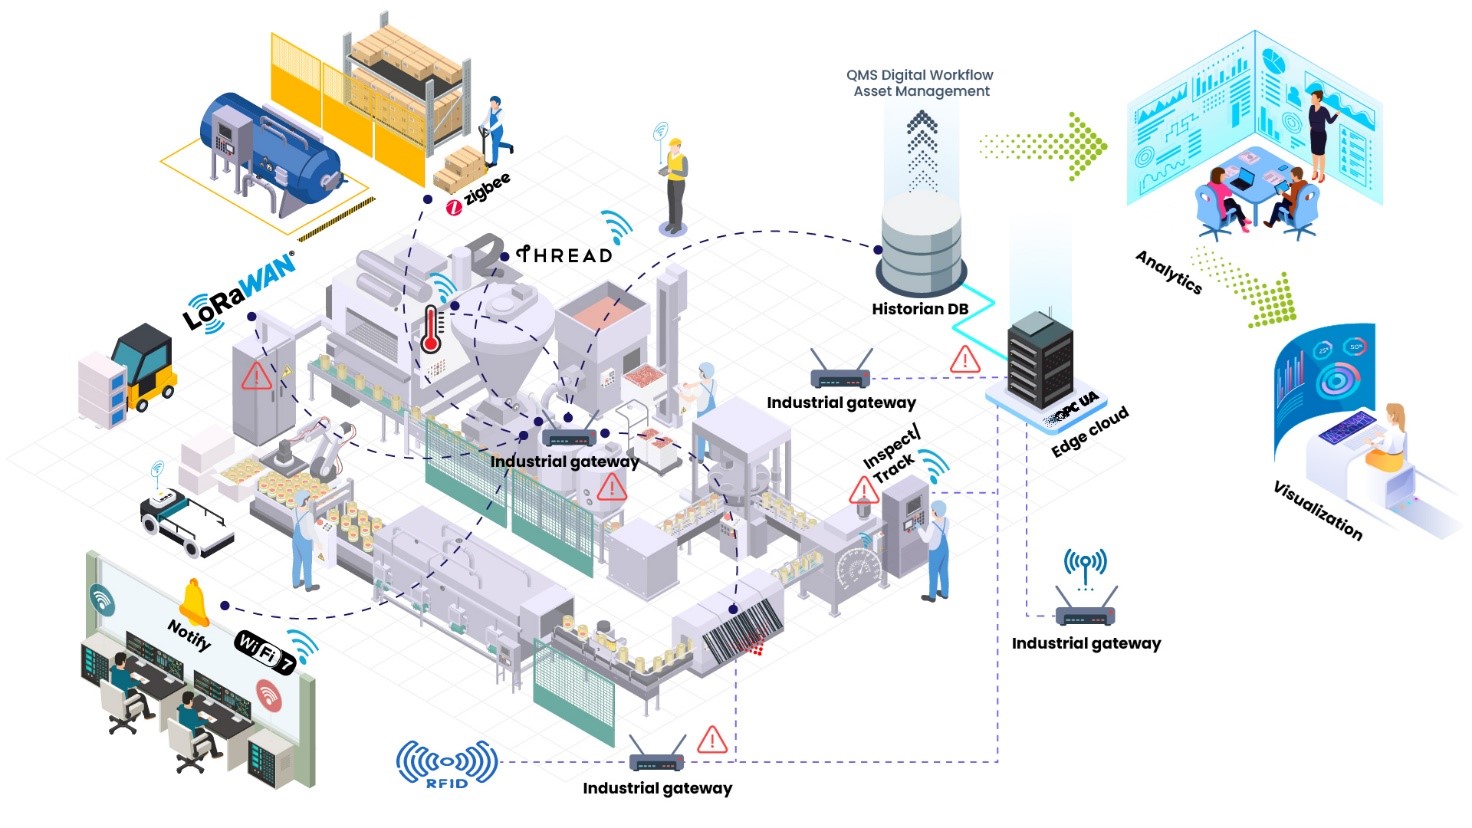 SDN based Network design for manufacturing plants